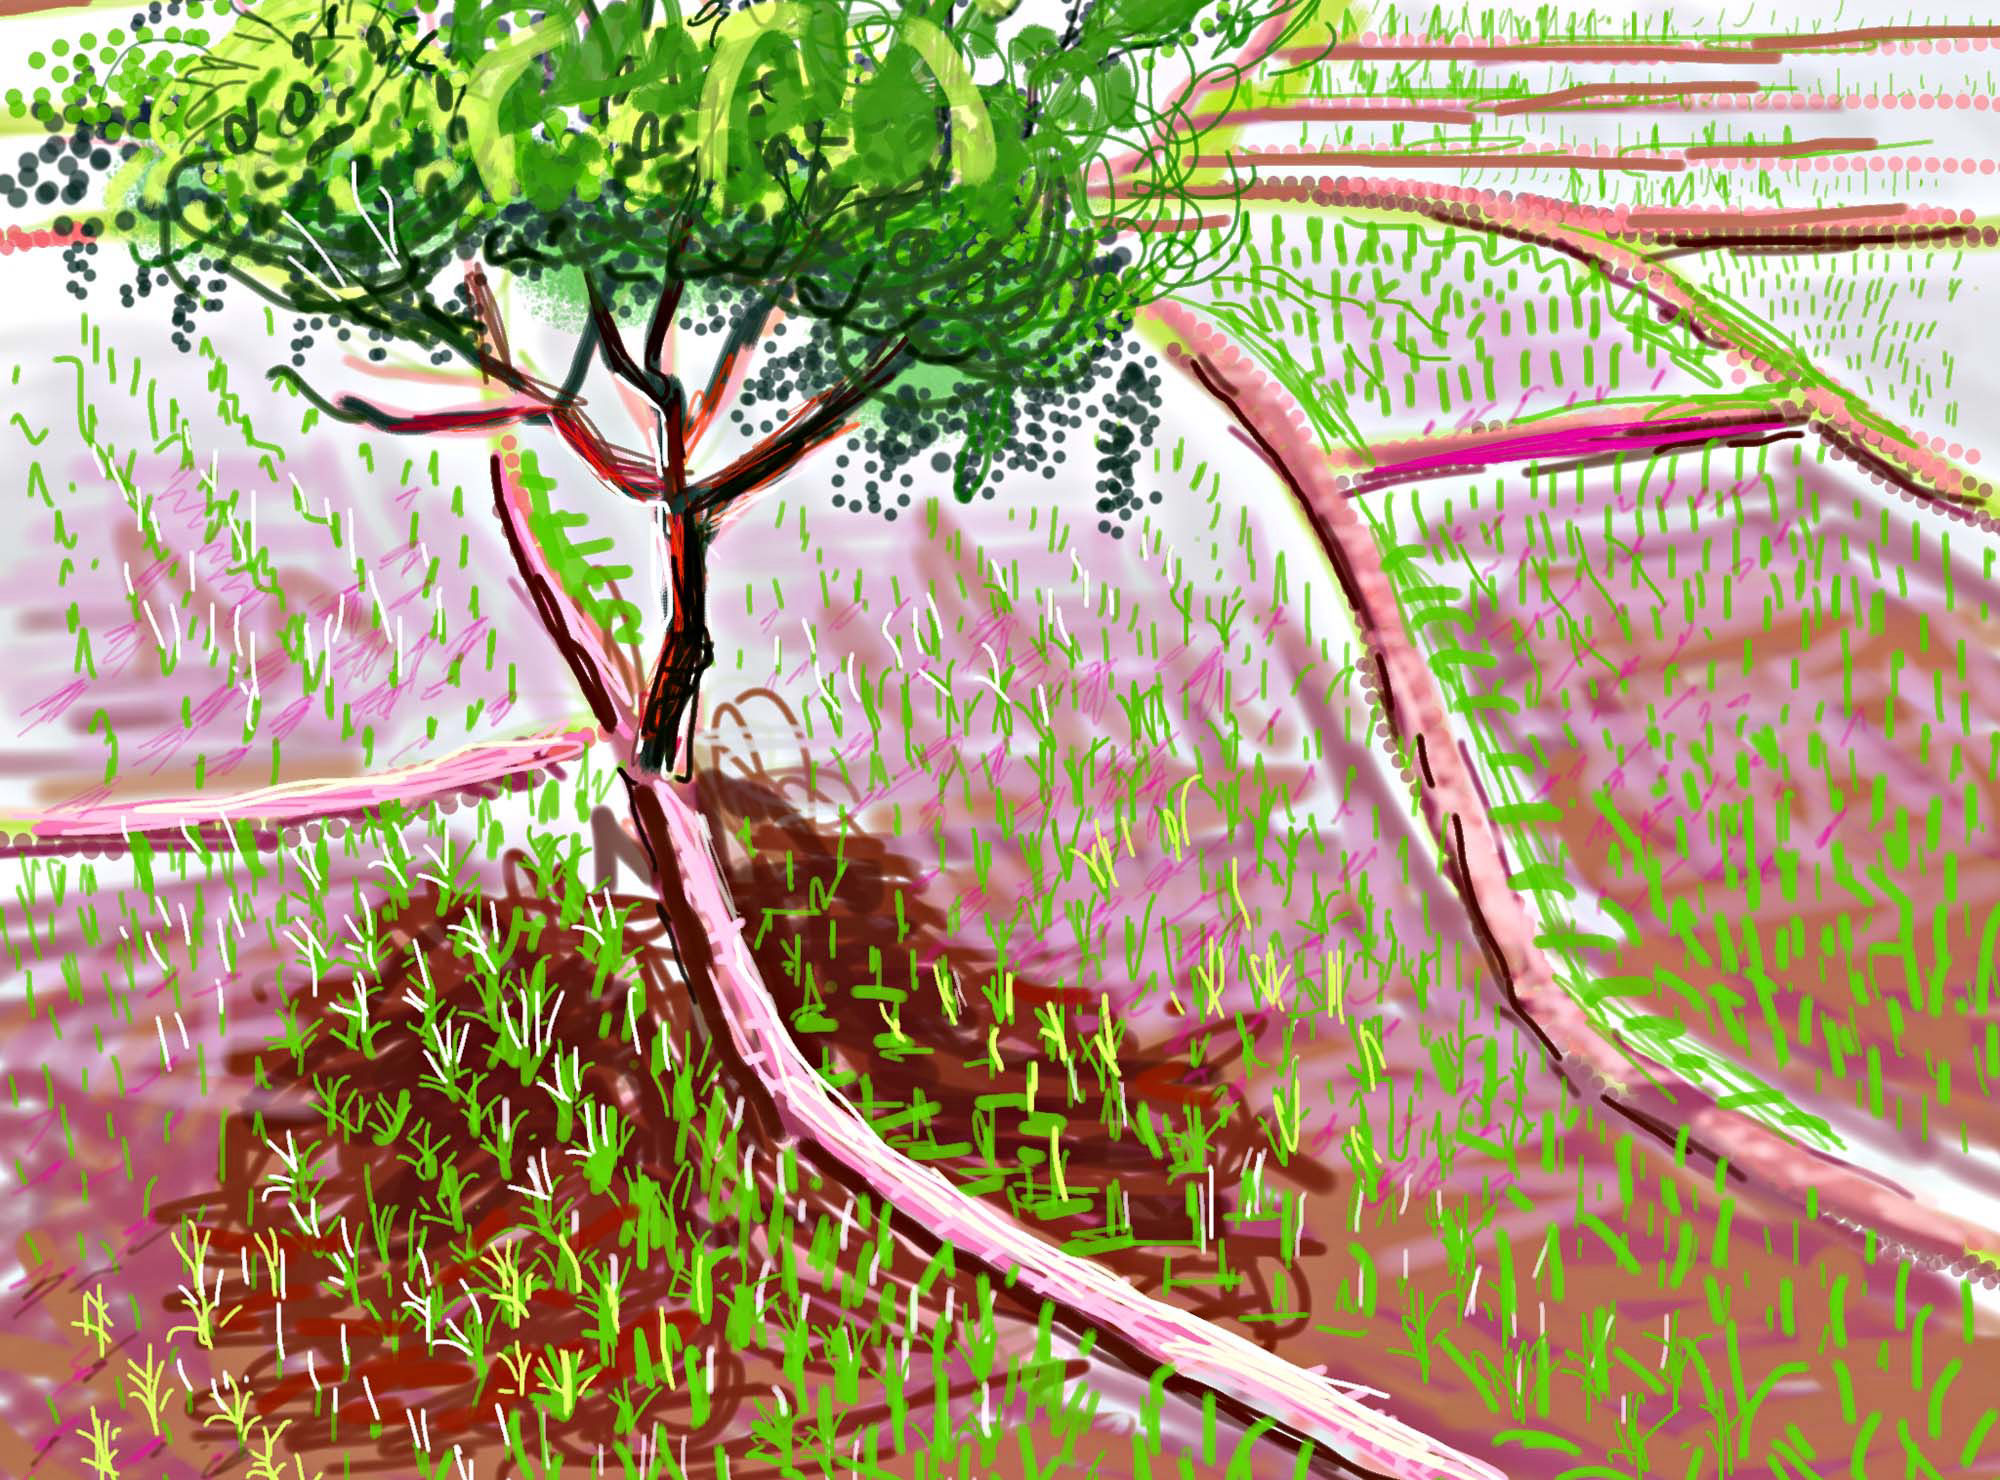 Andy Maitland, 2020, iPad Artist, Commission, iPad Drawing for United Kingdom Research and Innovation 2020 International Year of Plant Health